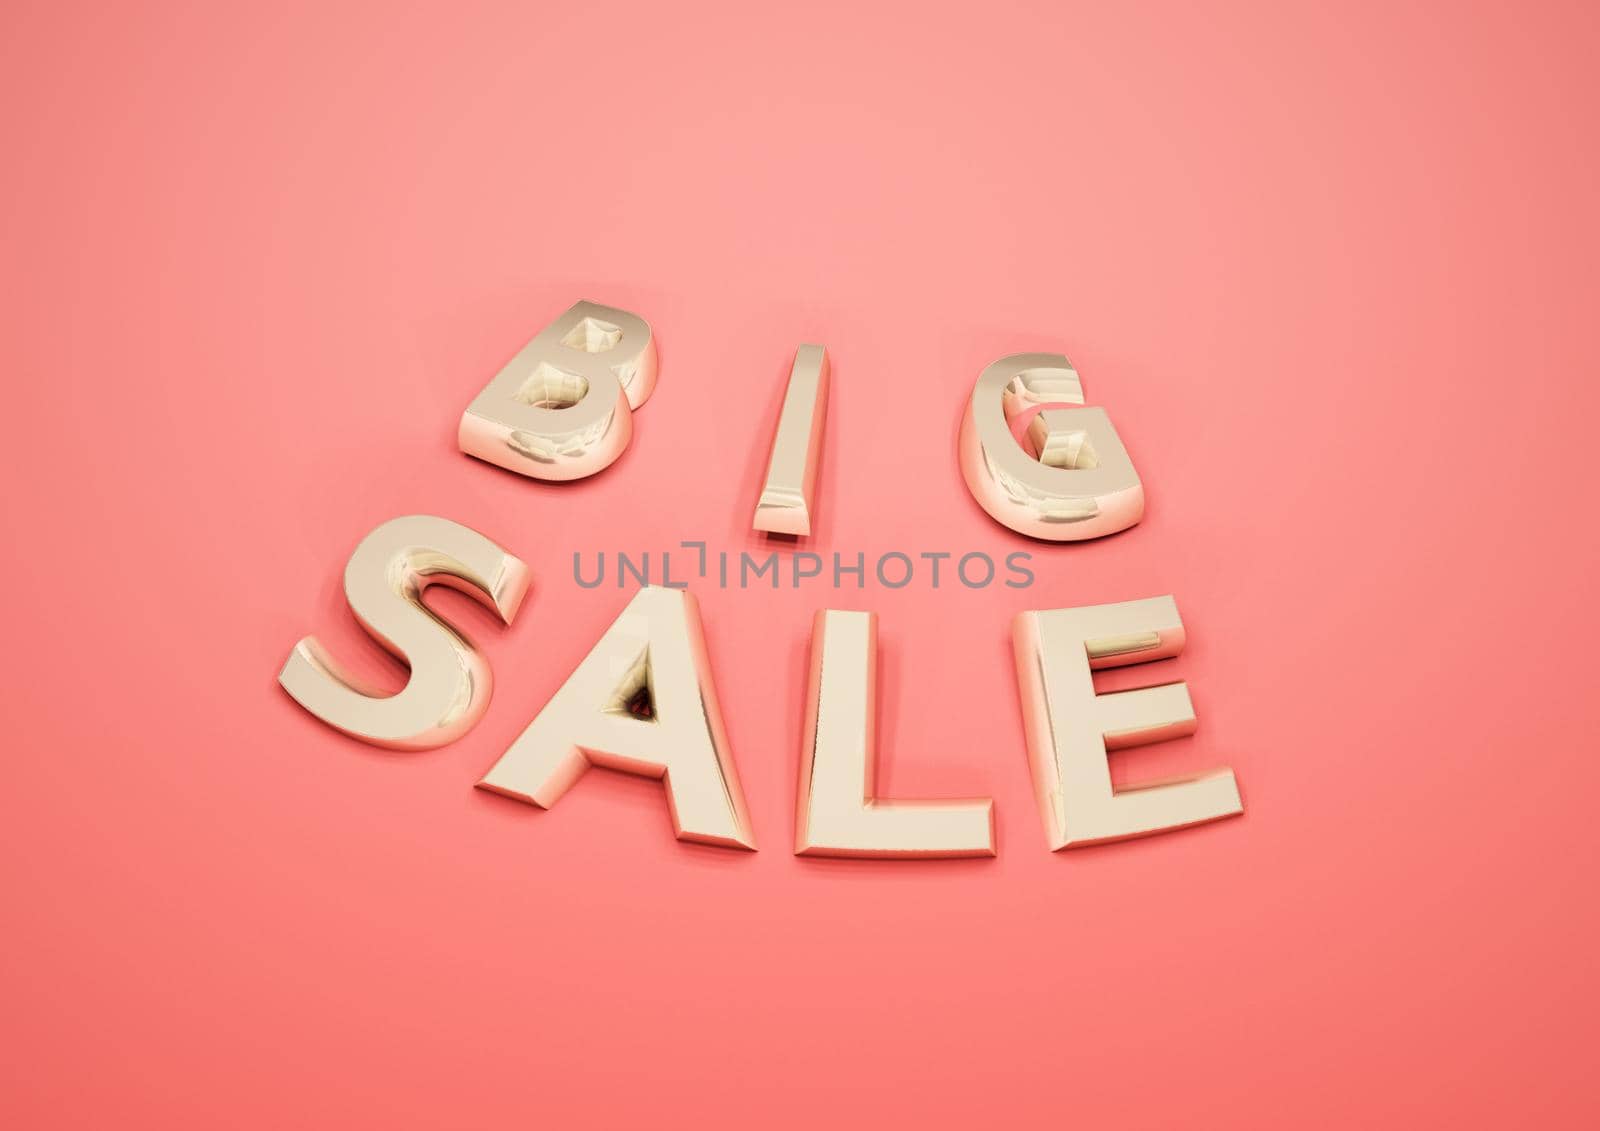 Dimensional inscription of Big SALE isolated on background. 3D illustration.